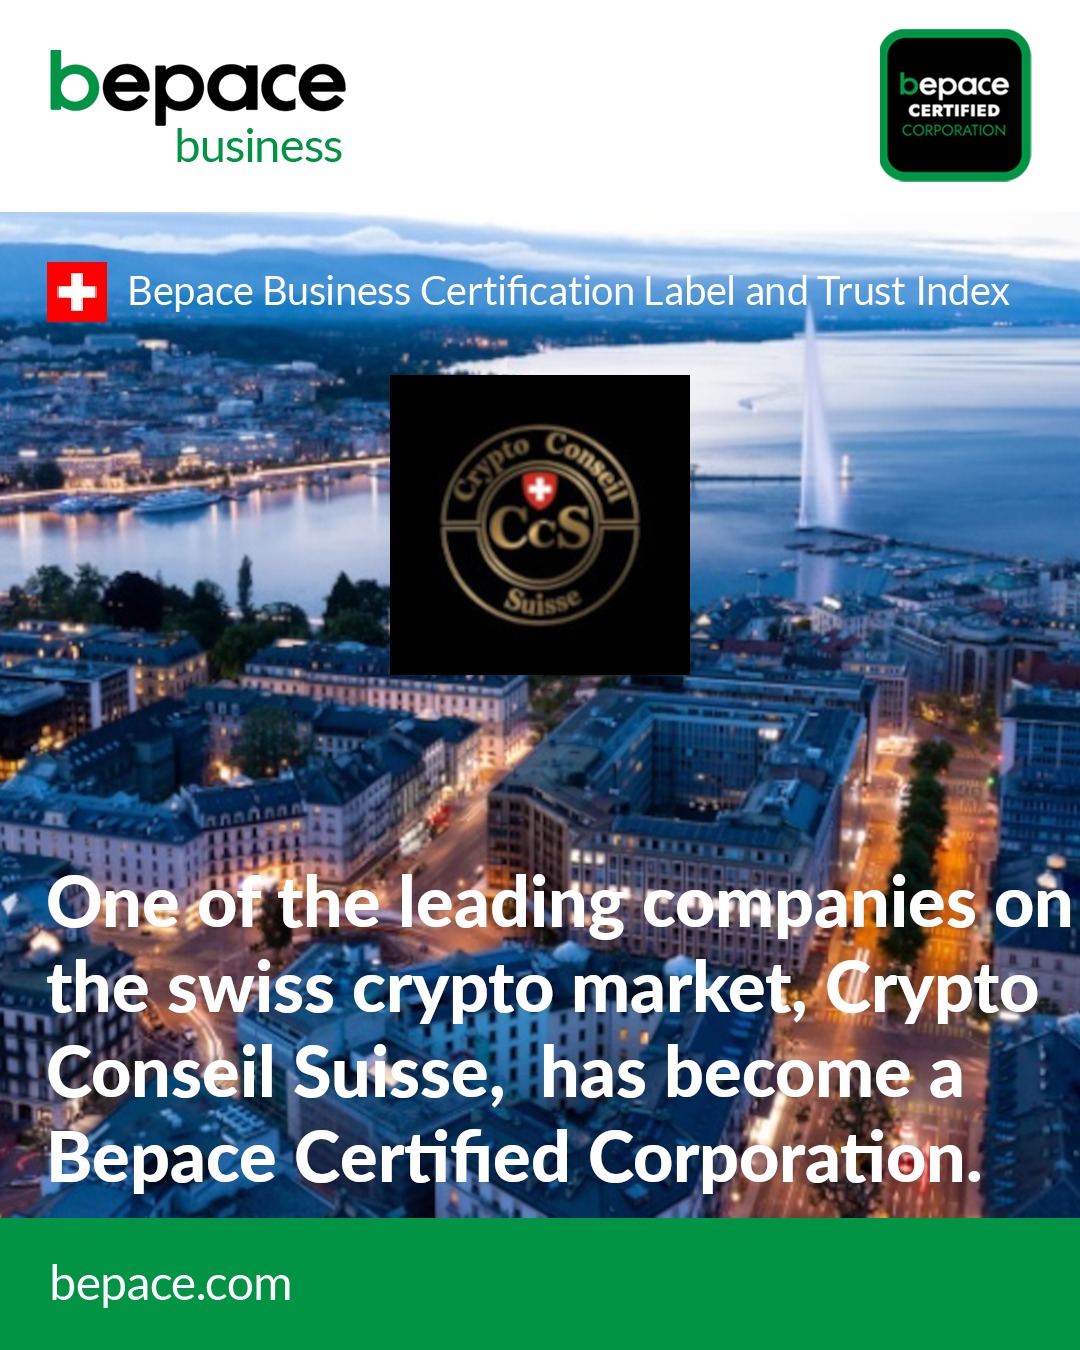 Crypto Conseil Suisse: a new Bepace Certified Corporation